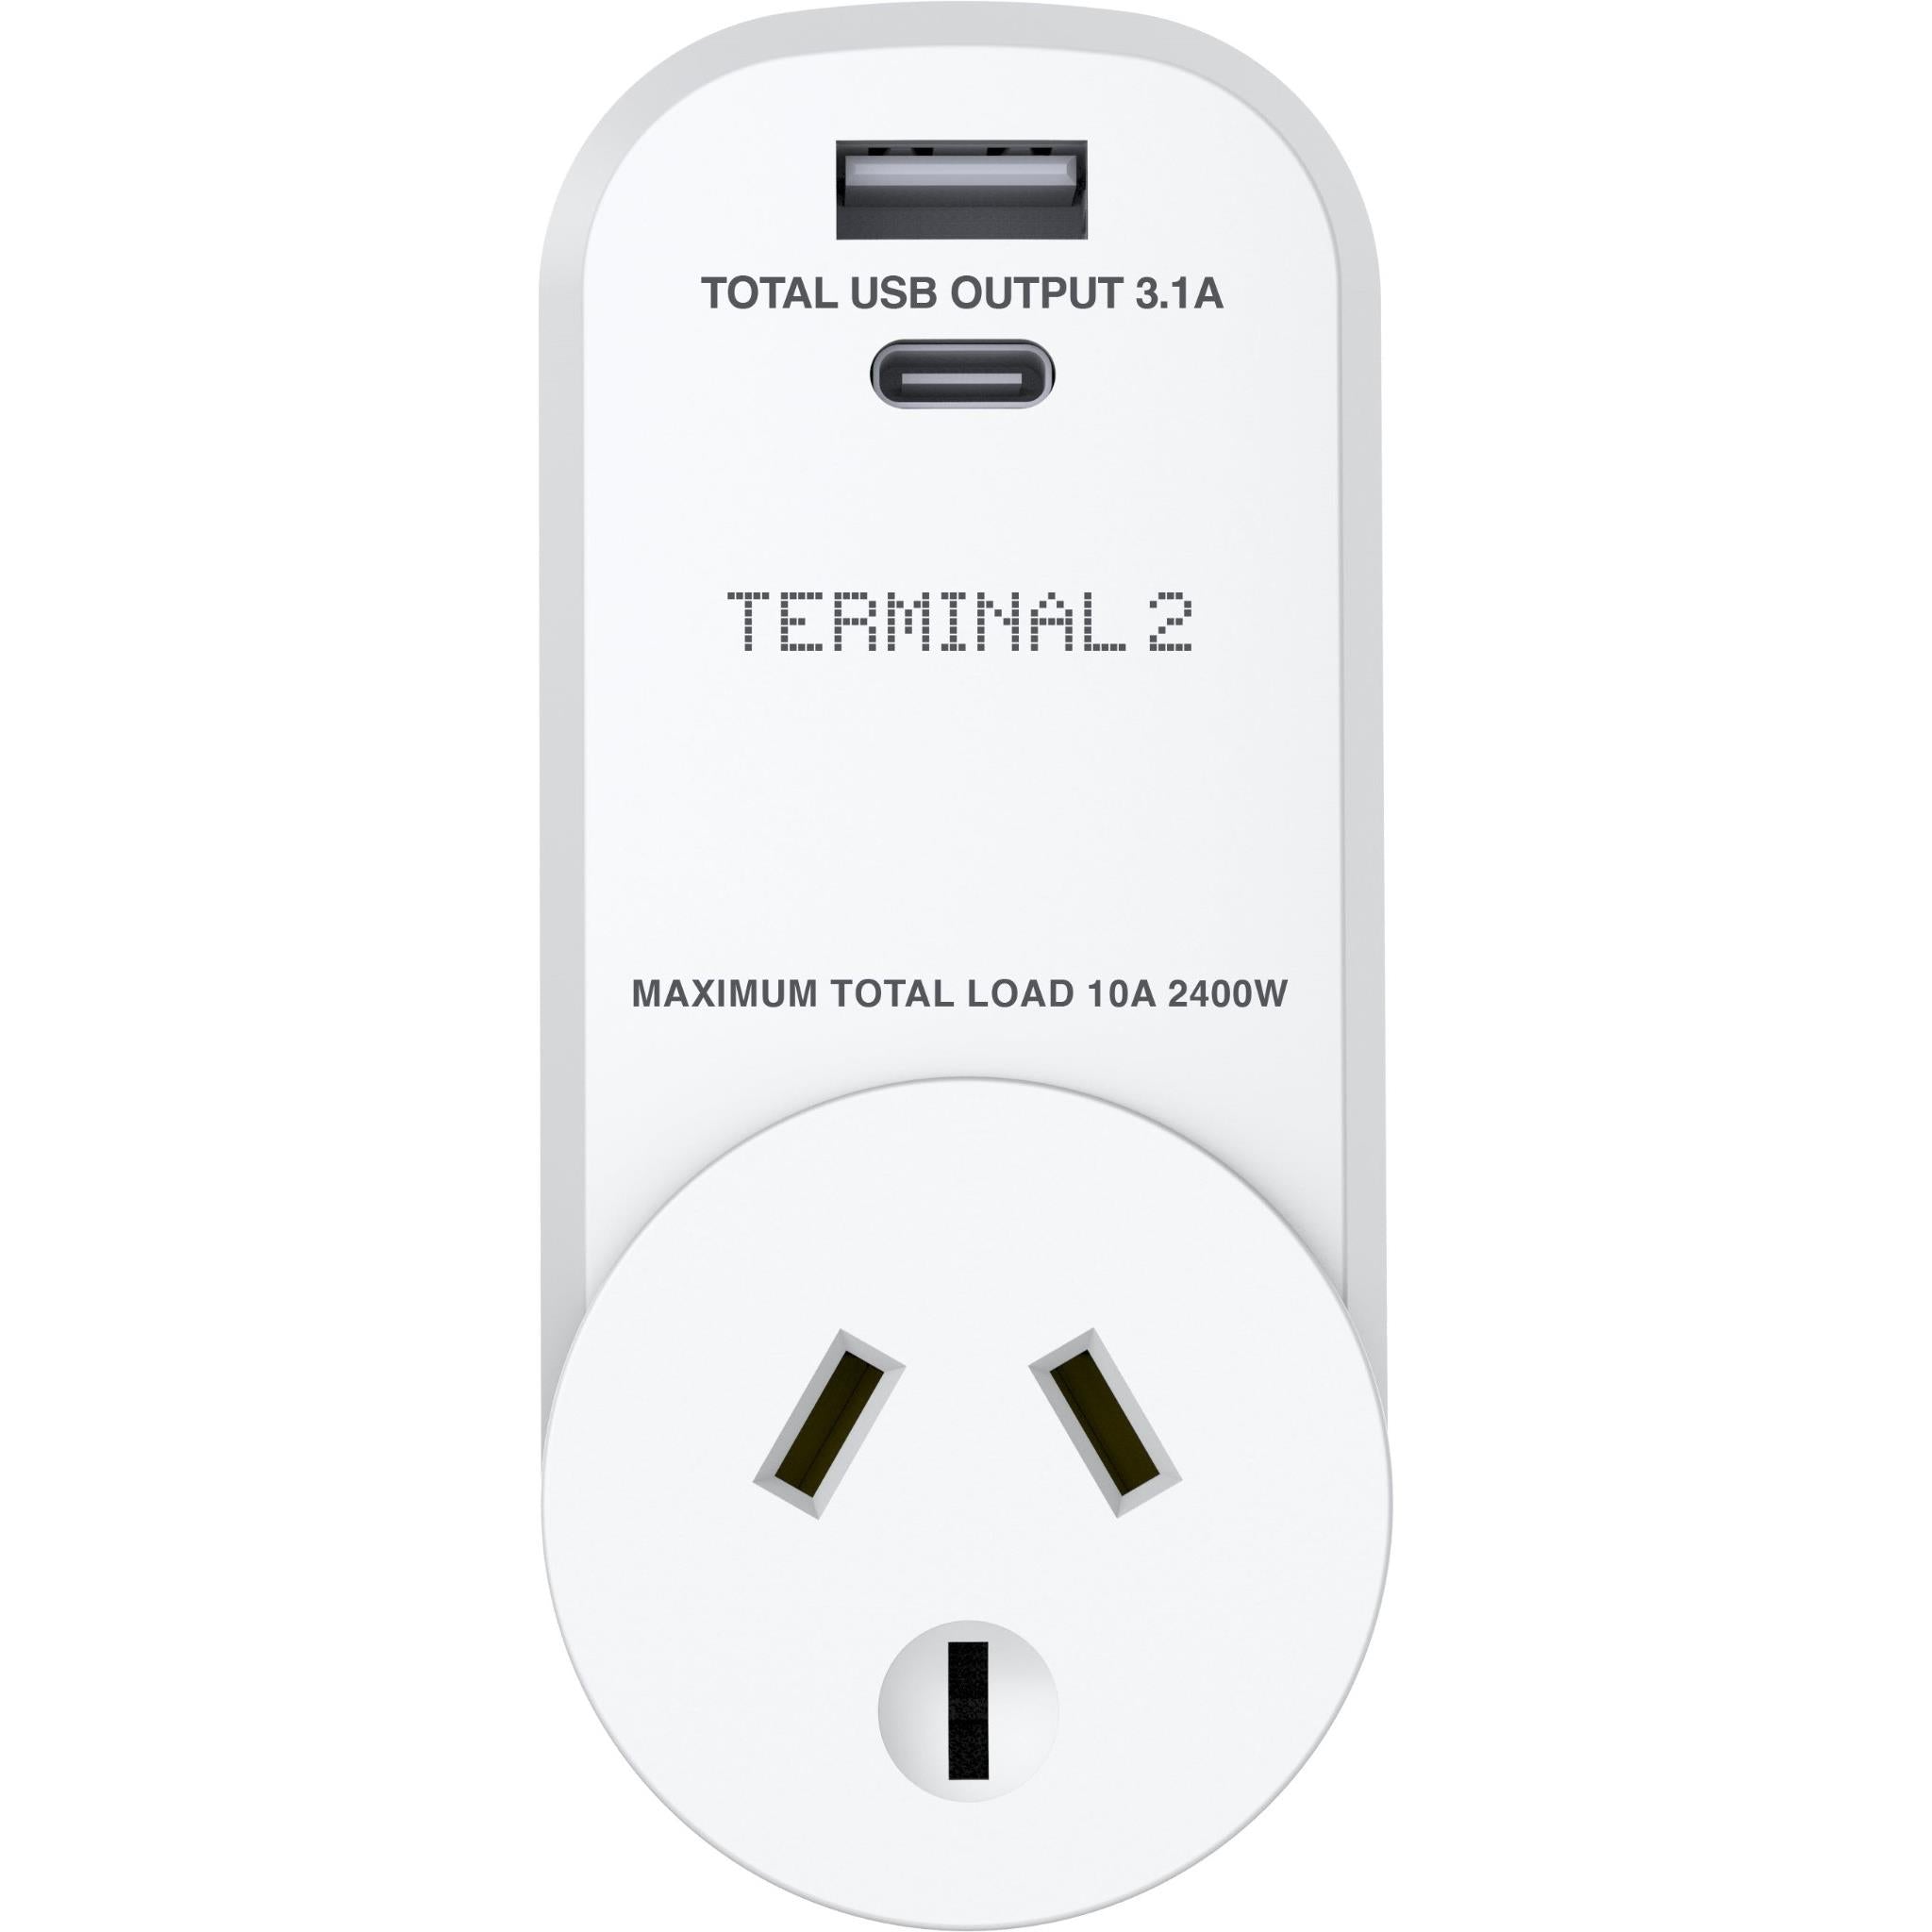 terminal 2 outbound travel adaptor with usb-a and usb-c ports europe